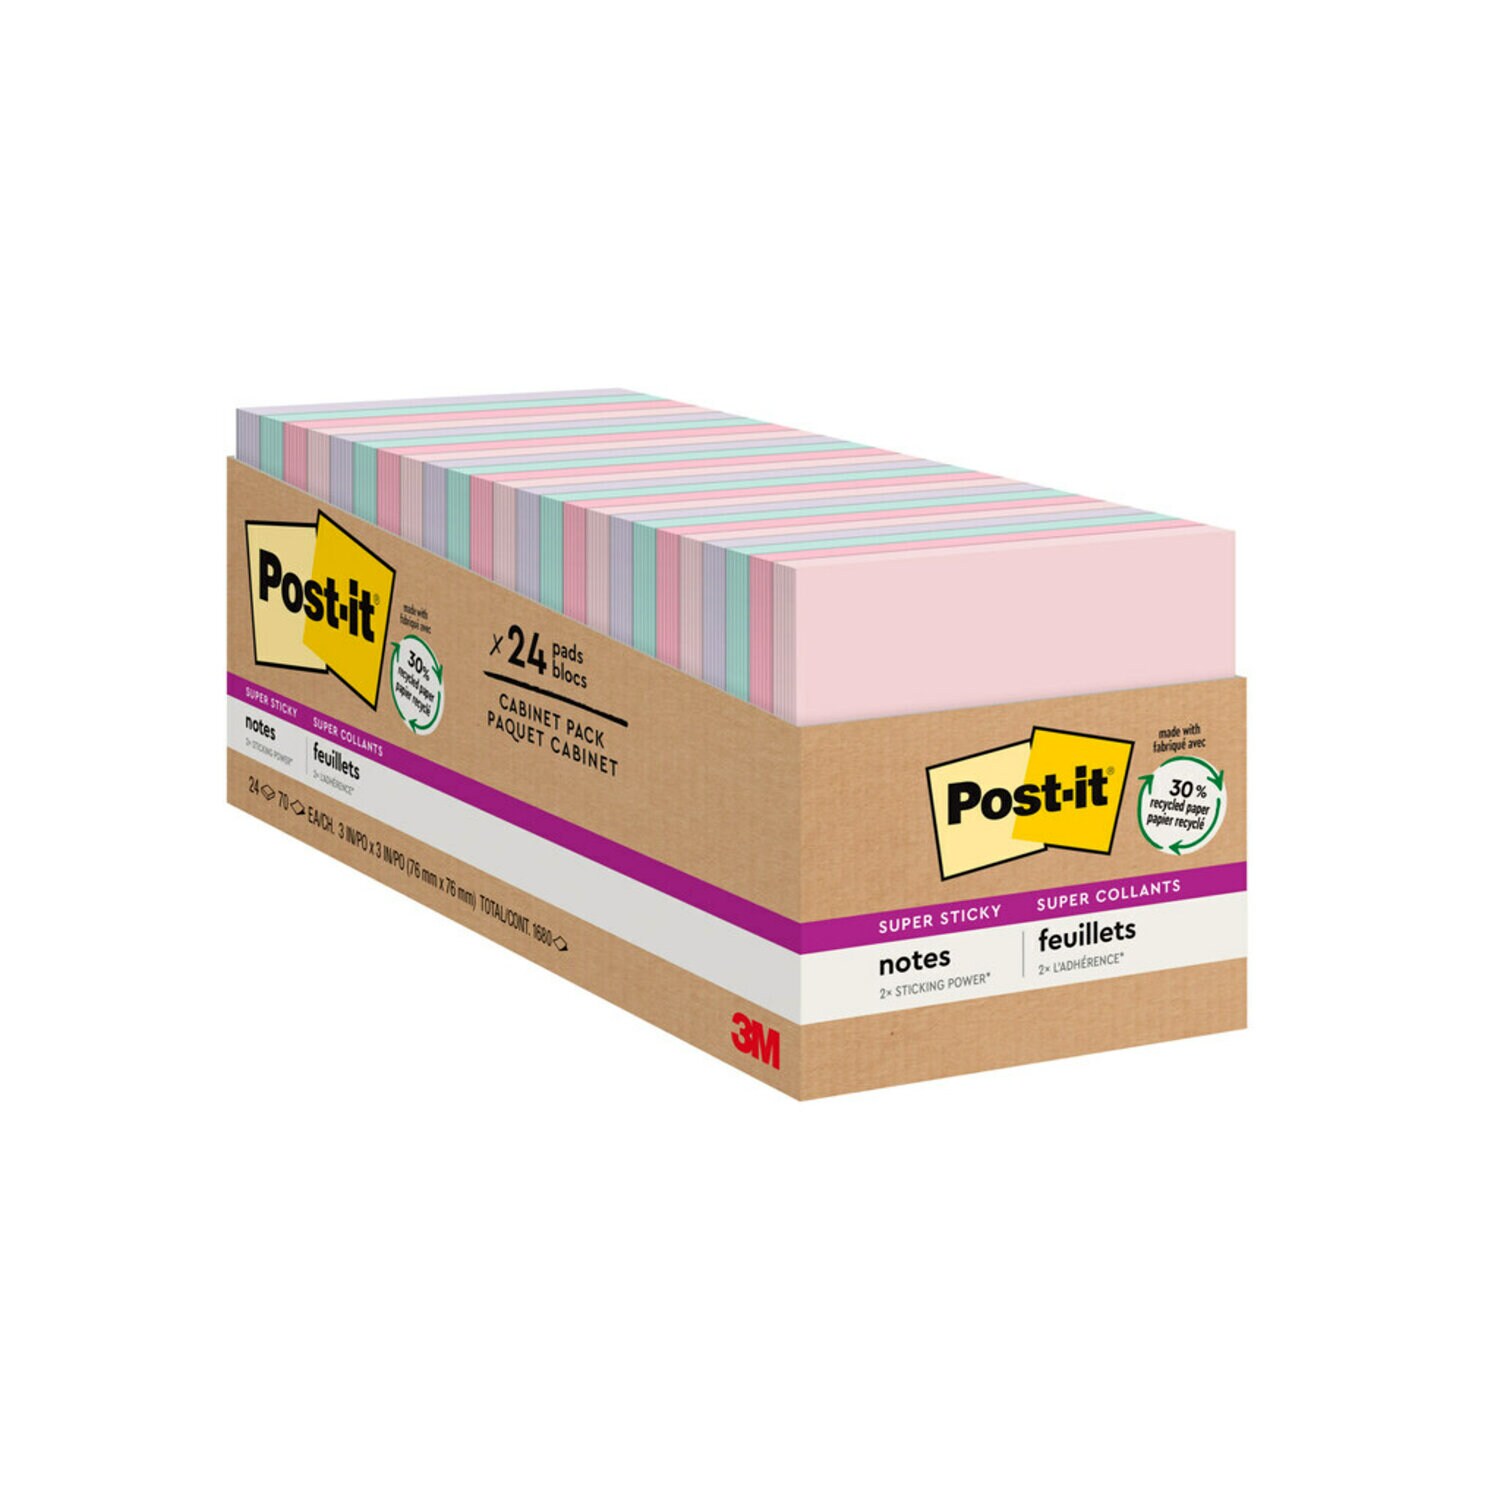 7100063859 - Post-it Super Sticky Recycled Notes 654-24NH-CP, 3 in x 3 in (76 mm x 76 mm), Wanderlust Pastels Collection